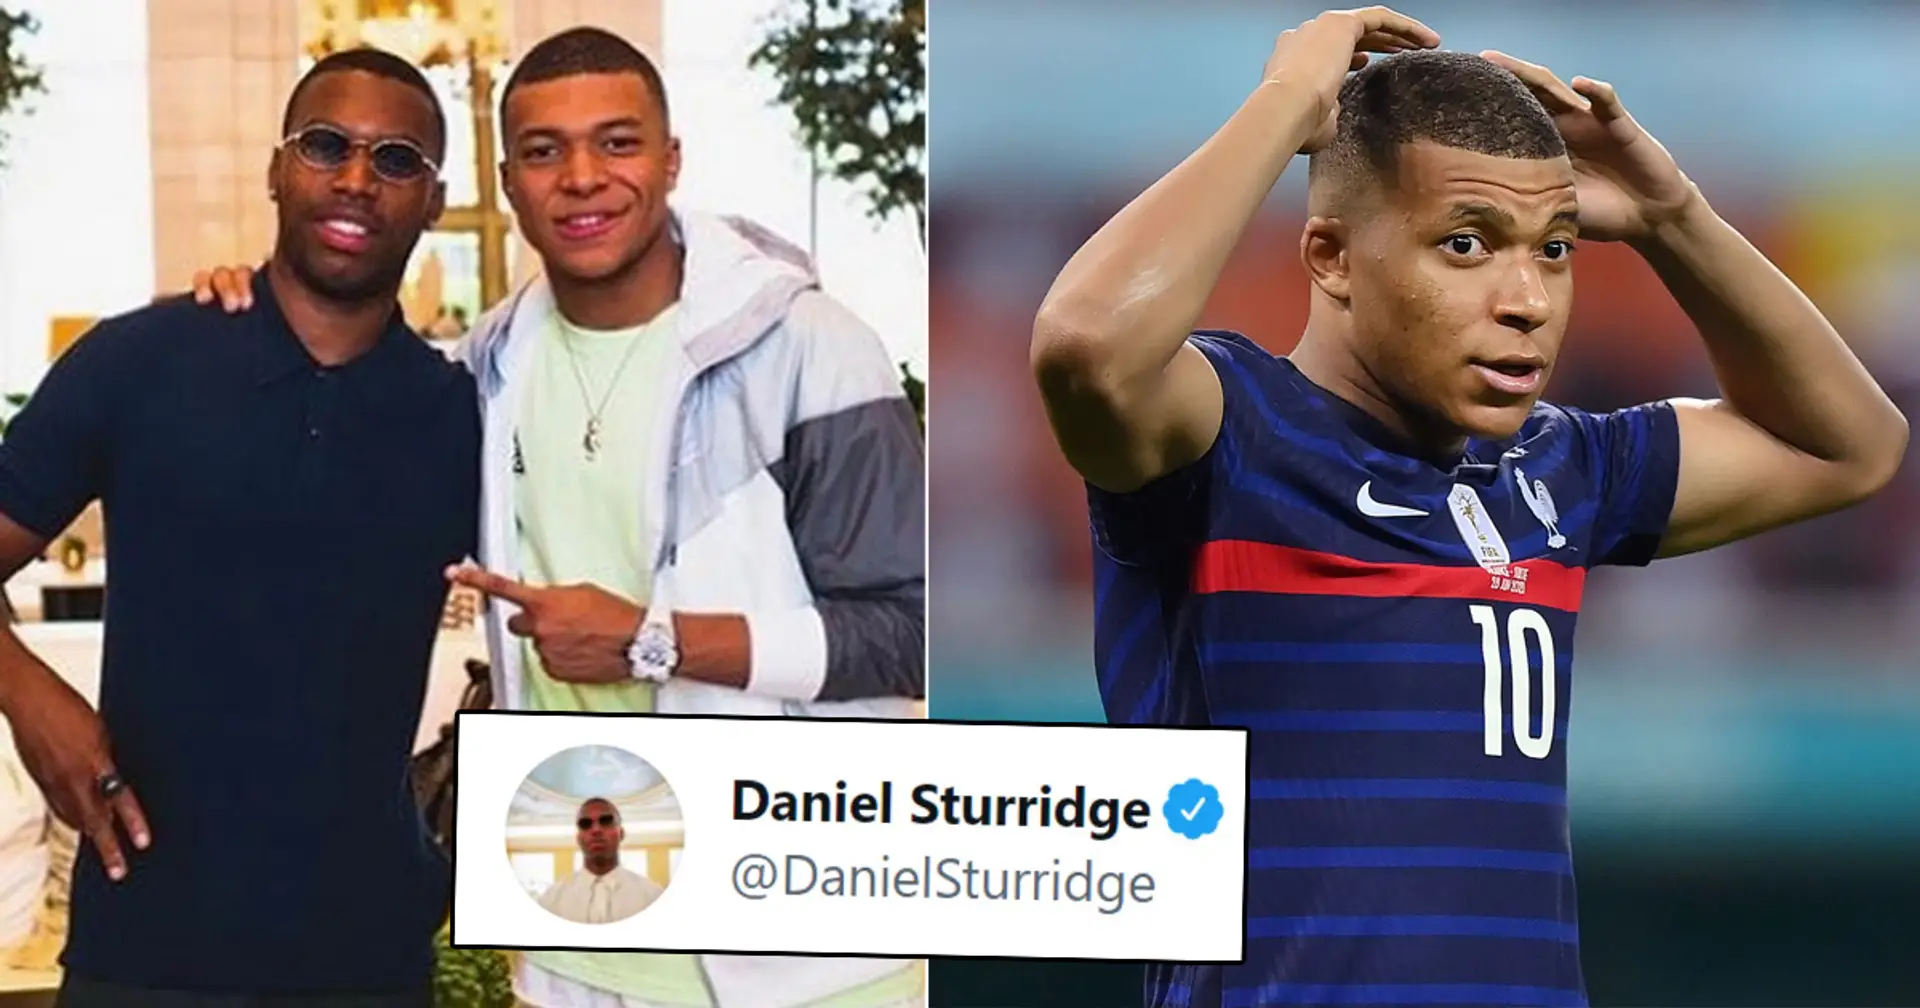 Daniel Sturridge sends message of support to Kylian Mbappe amid Liverpool links